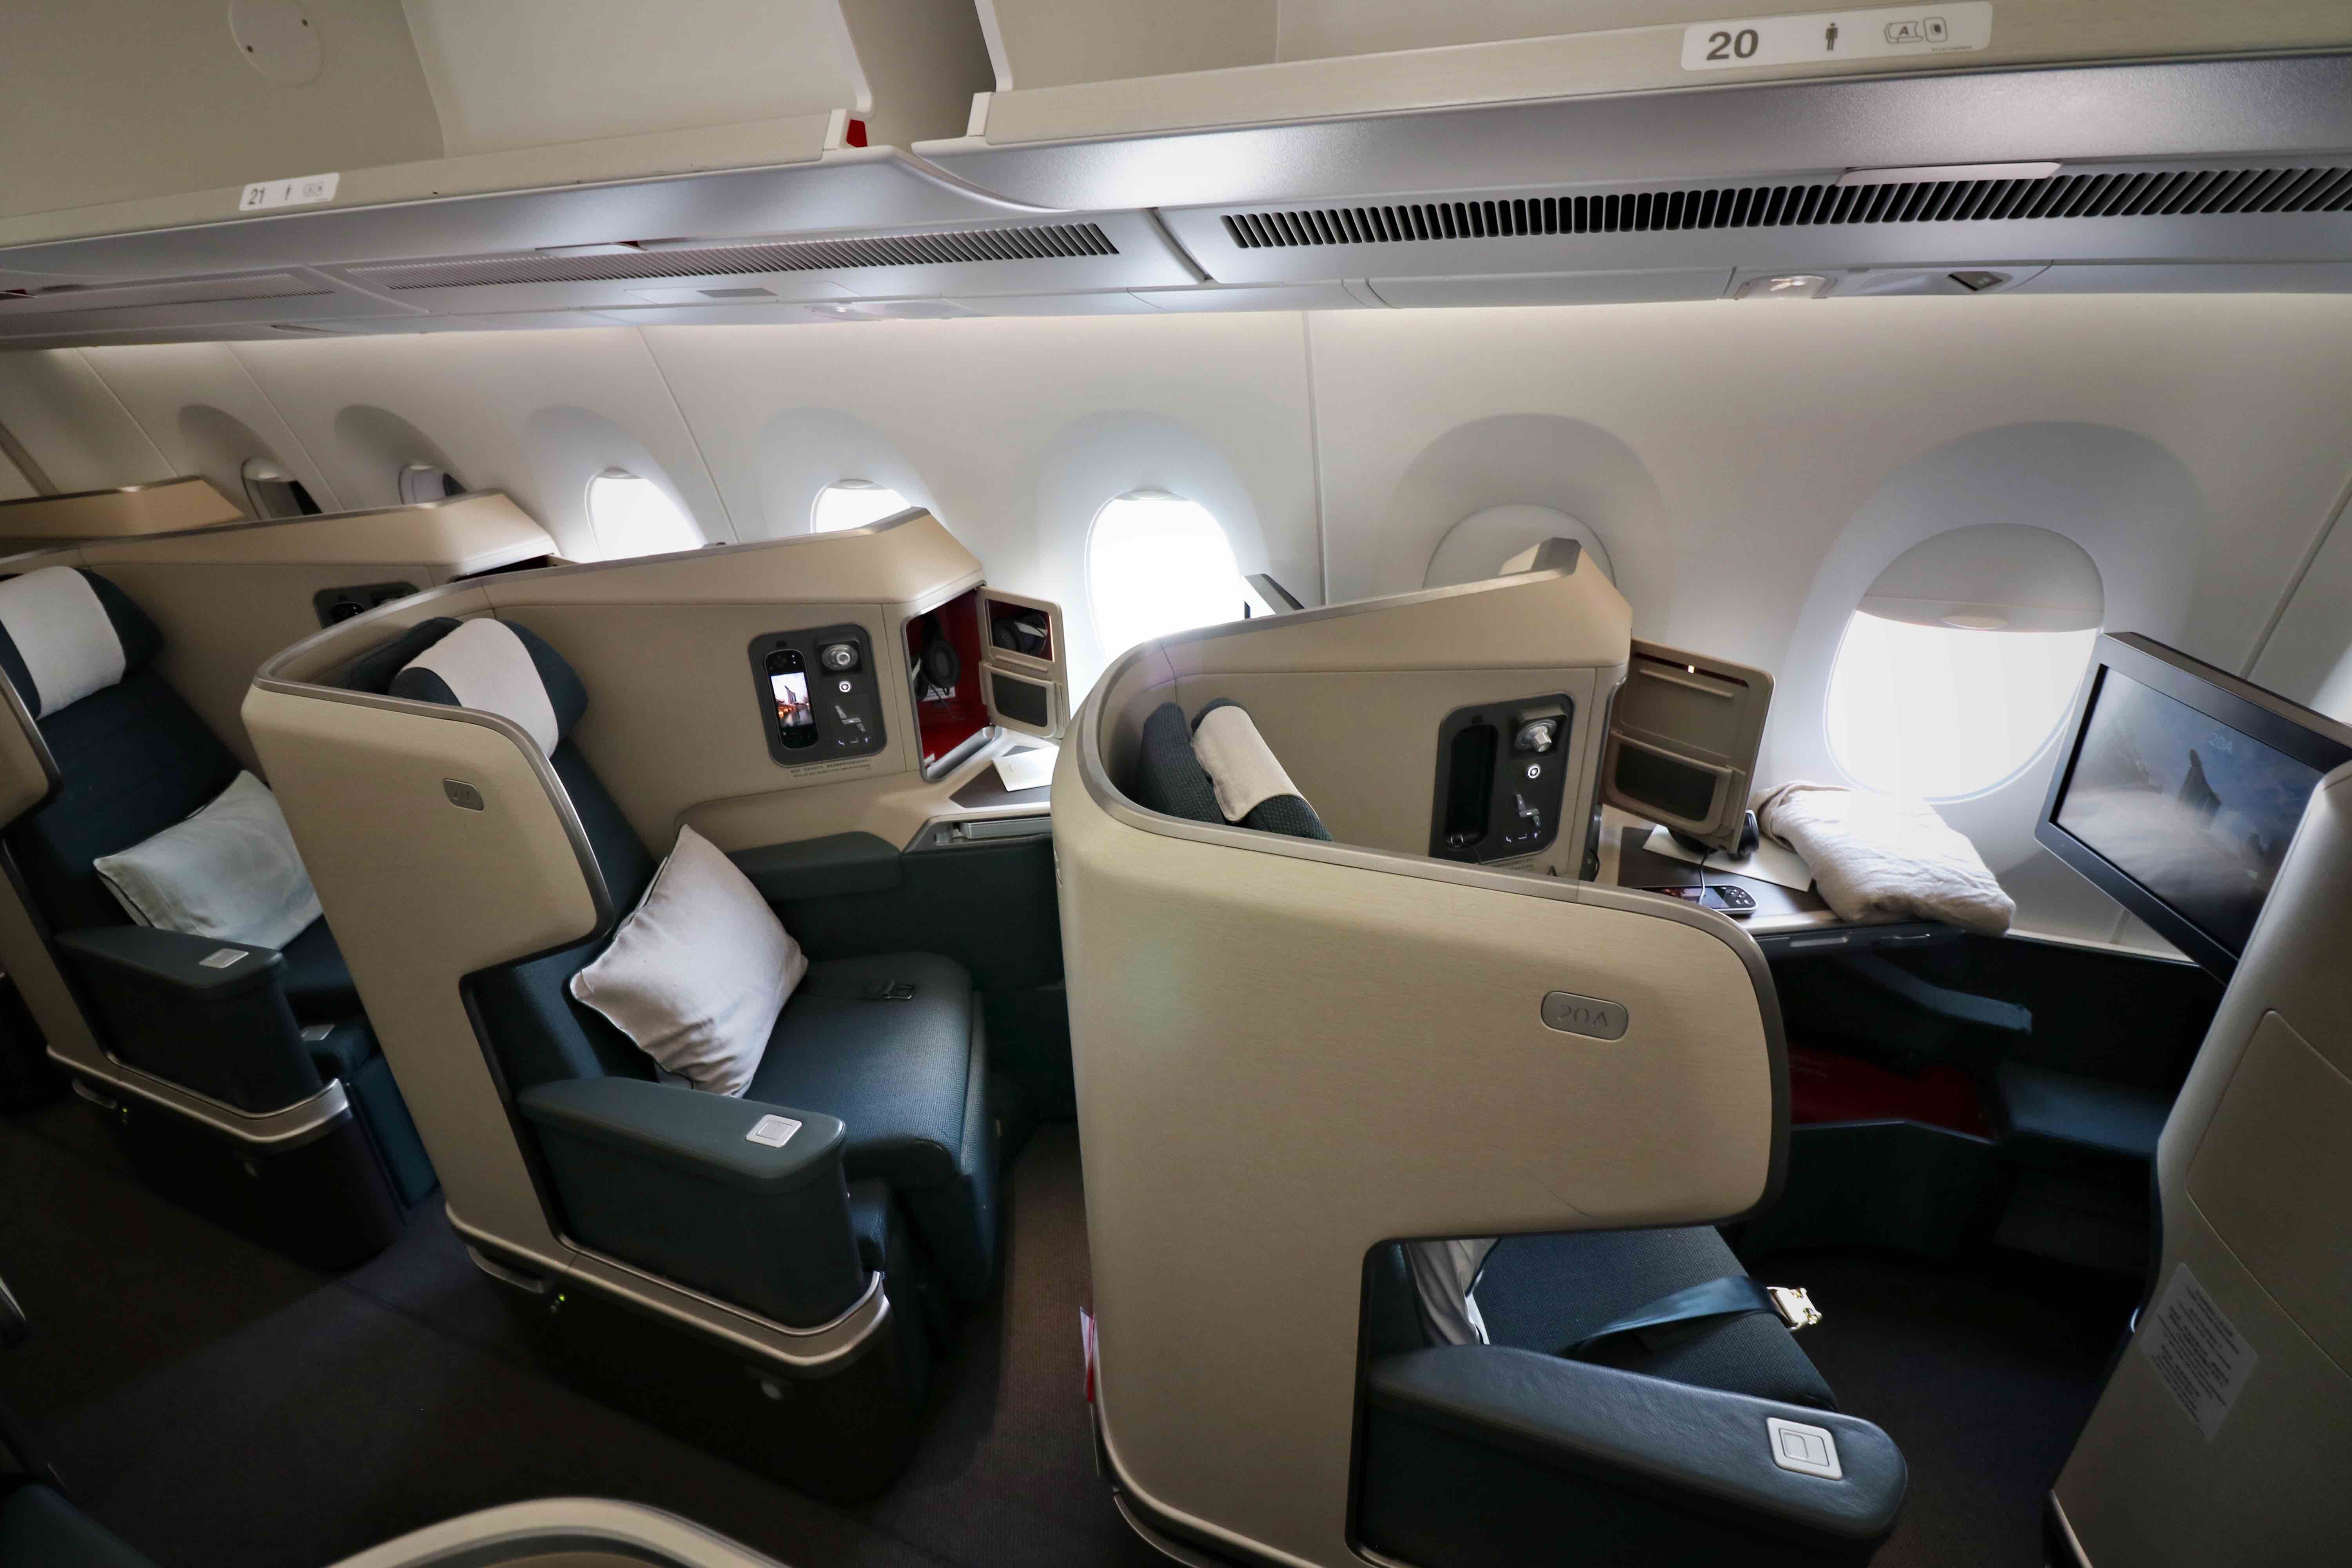 A Sneak Peek At Cathay Pacific's New Airbus A3501000 Cabins... God